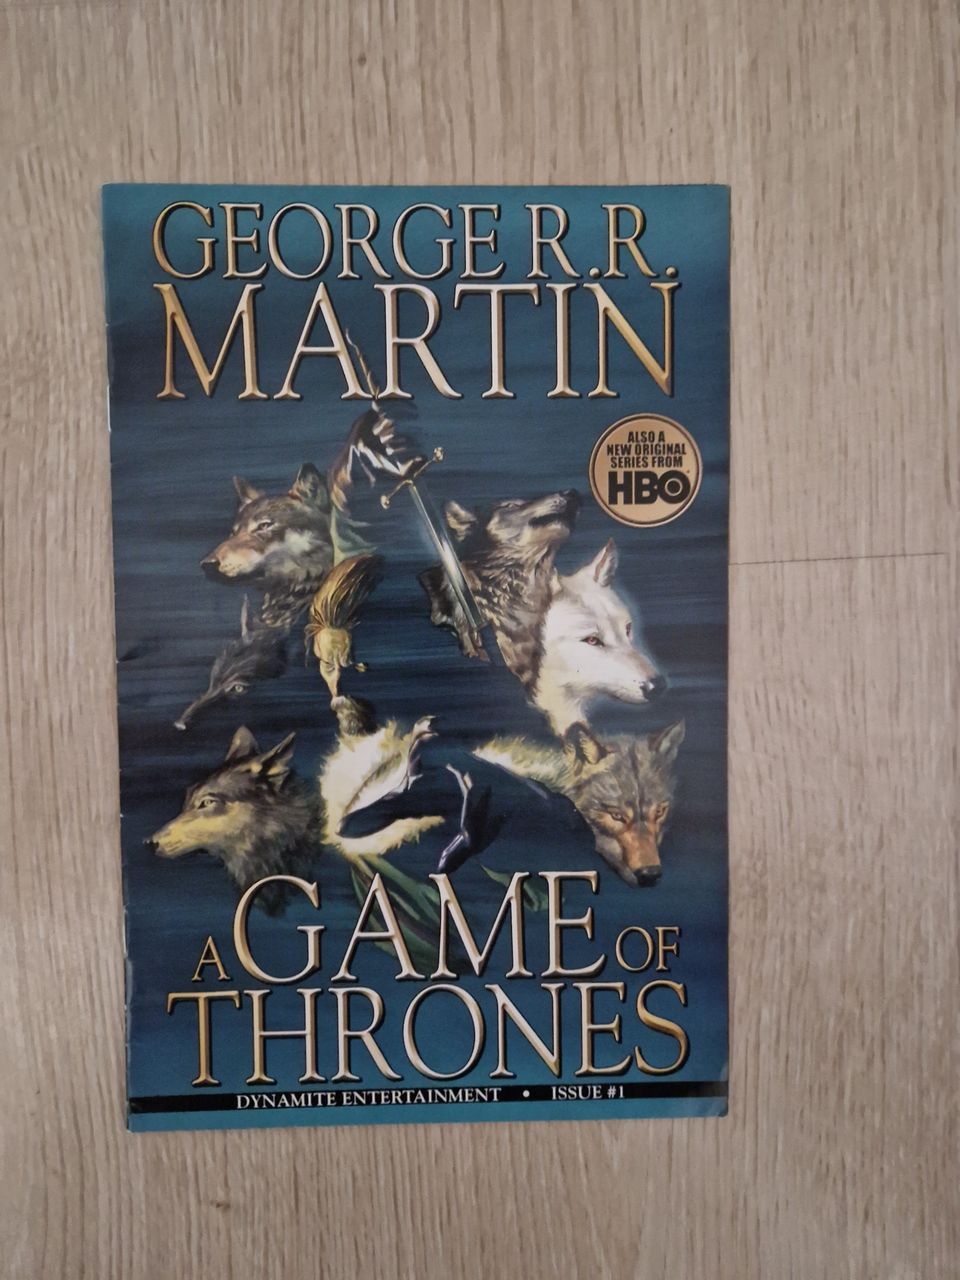 Game of thrones issue 1